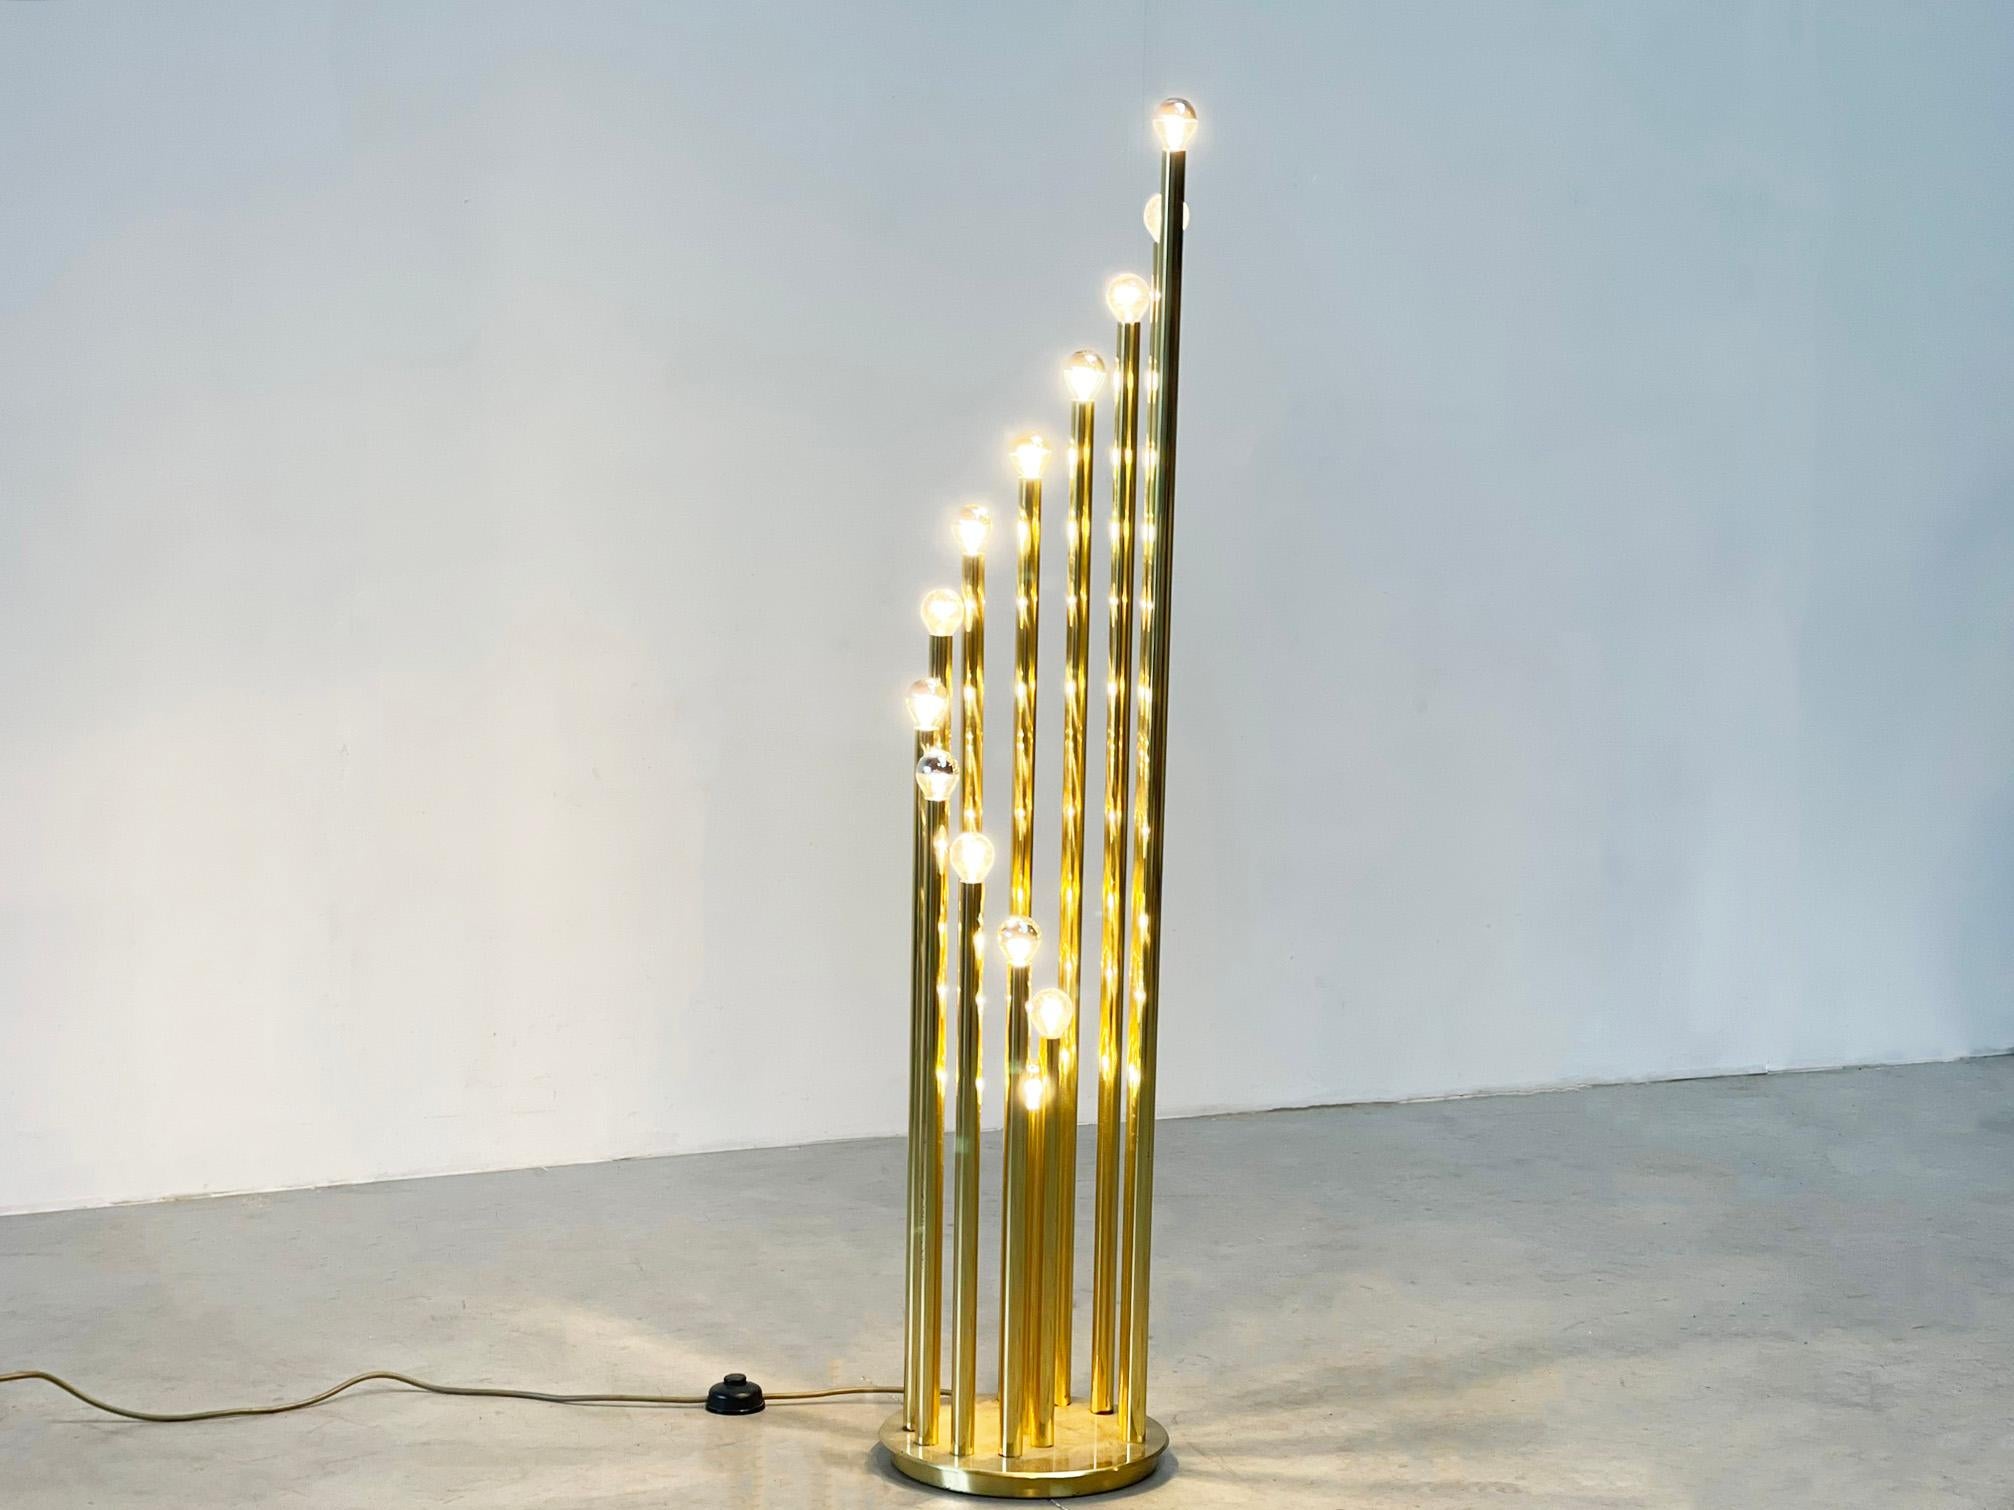 Brass xl Gaetano Sciolari floorlamp
70's brass floor lamp created by Italian designer Gaetano Sciolari. He is well known in the lighting business and well respected. 

The brass is in very good condition.

The floorlamp has 13 light points.

